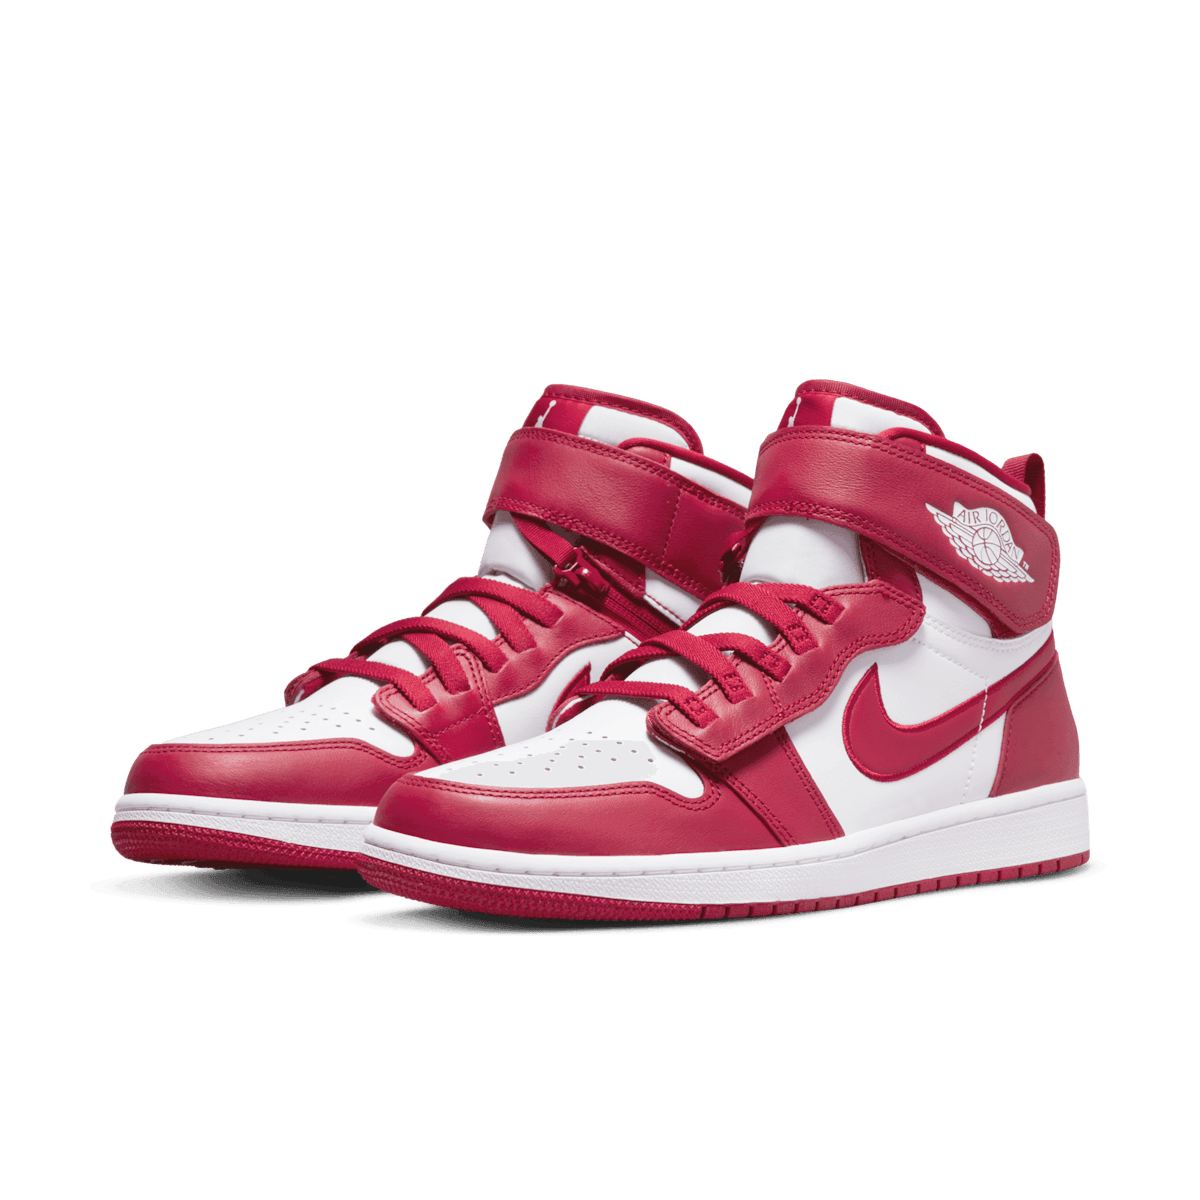 Jordan 1 Flyease Red and White Angle 2